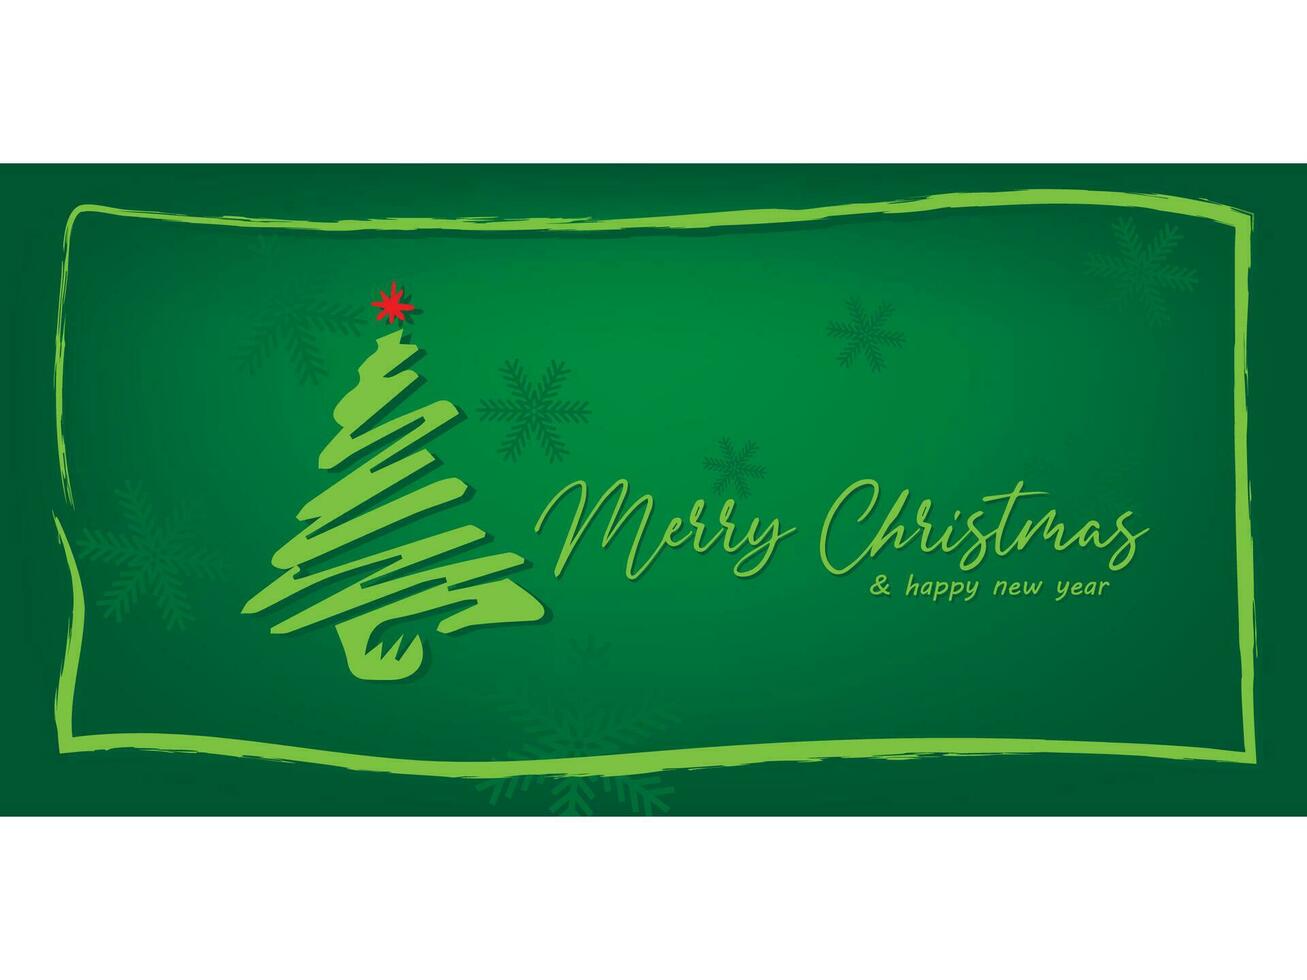 Merry Christmas and happy new year card design vector